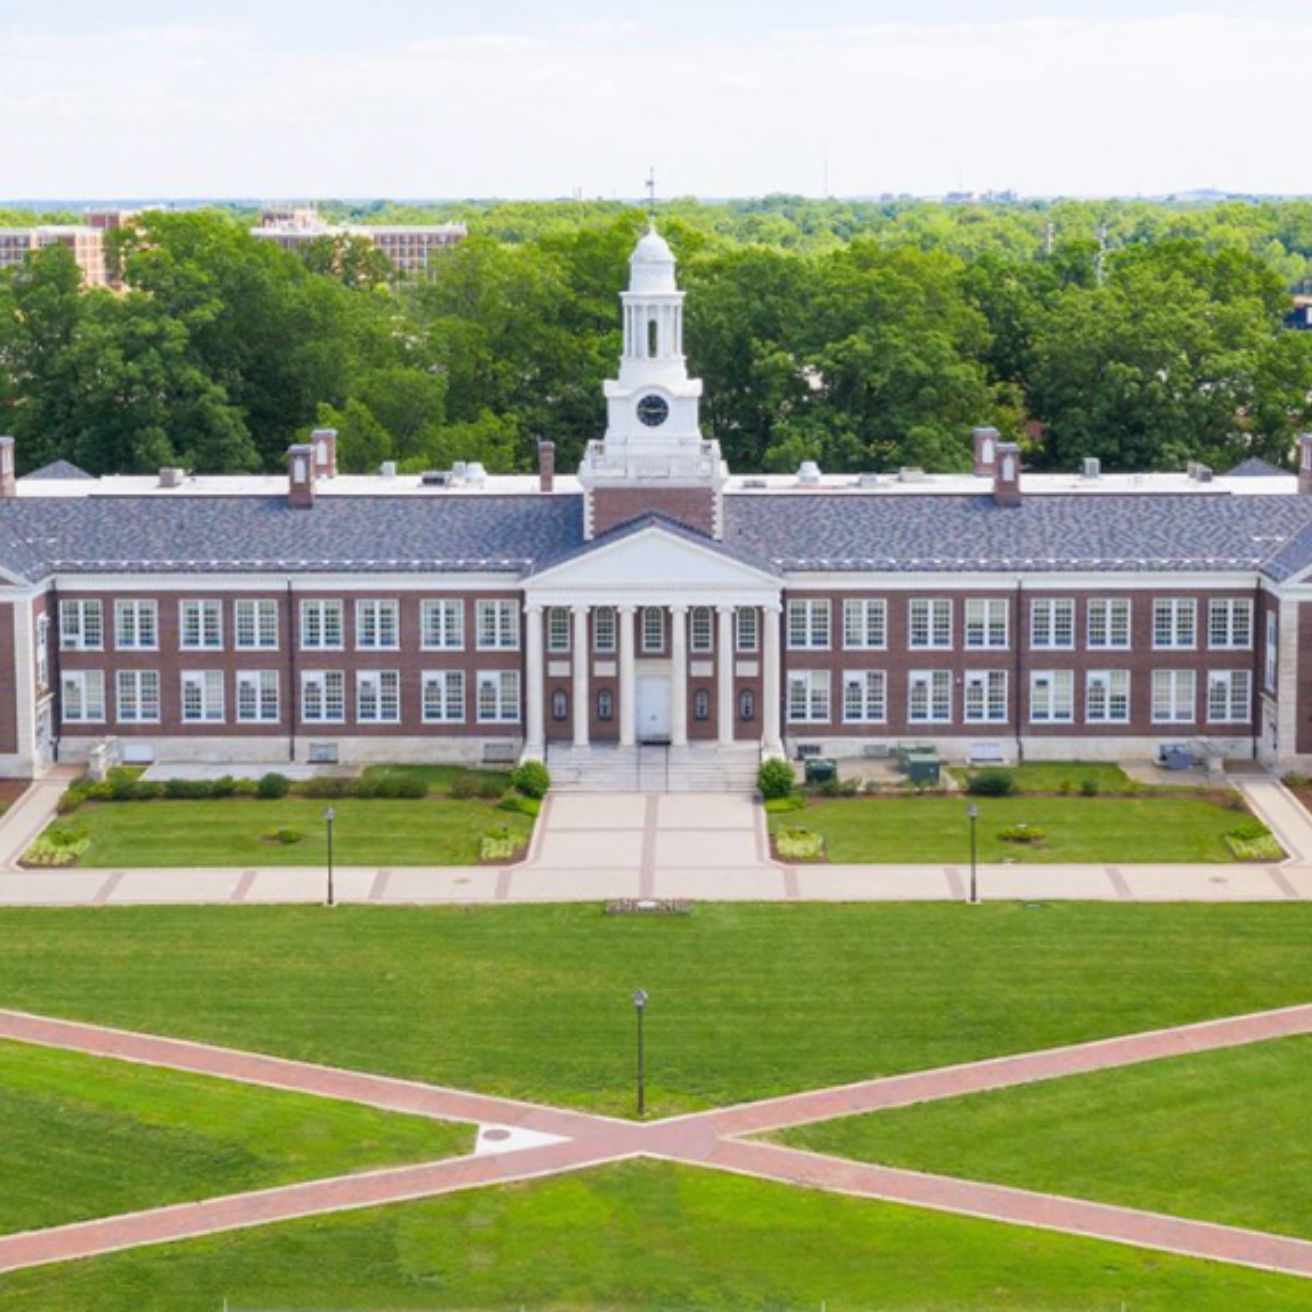 The College of New Jersey campus